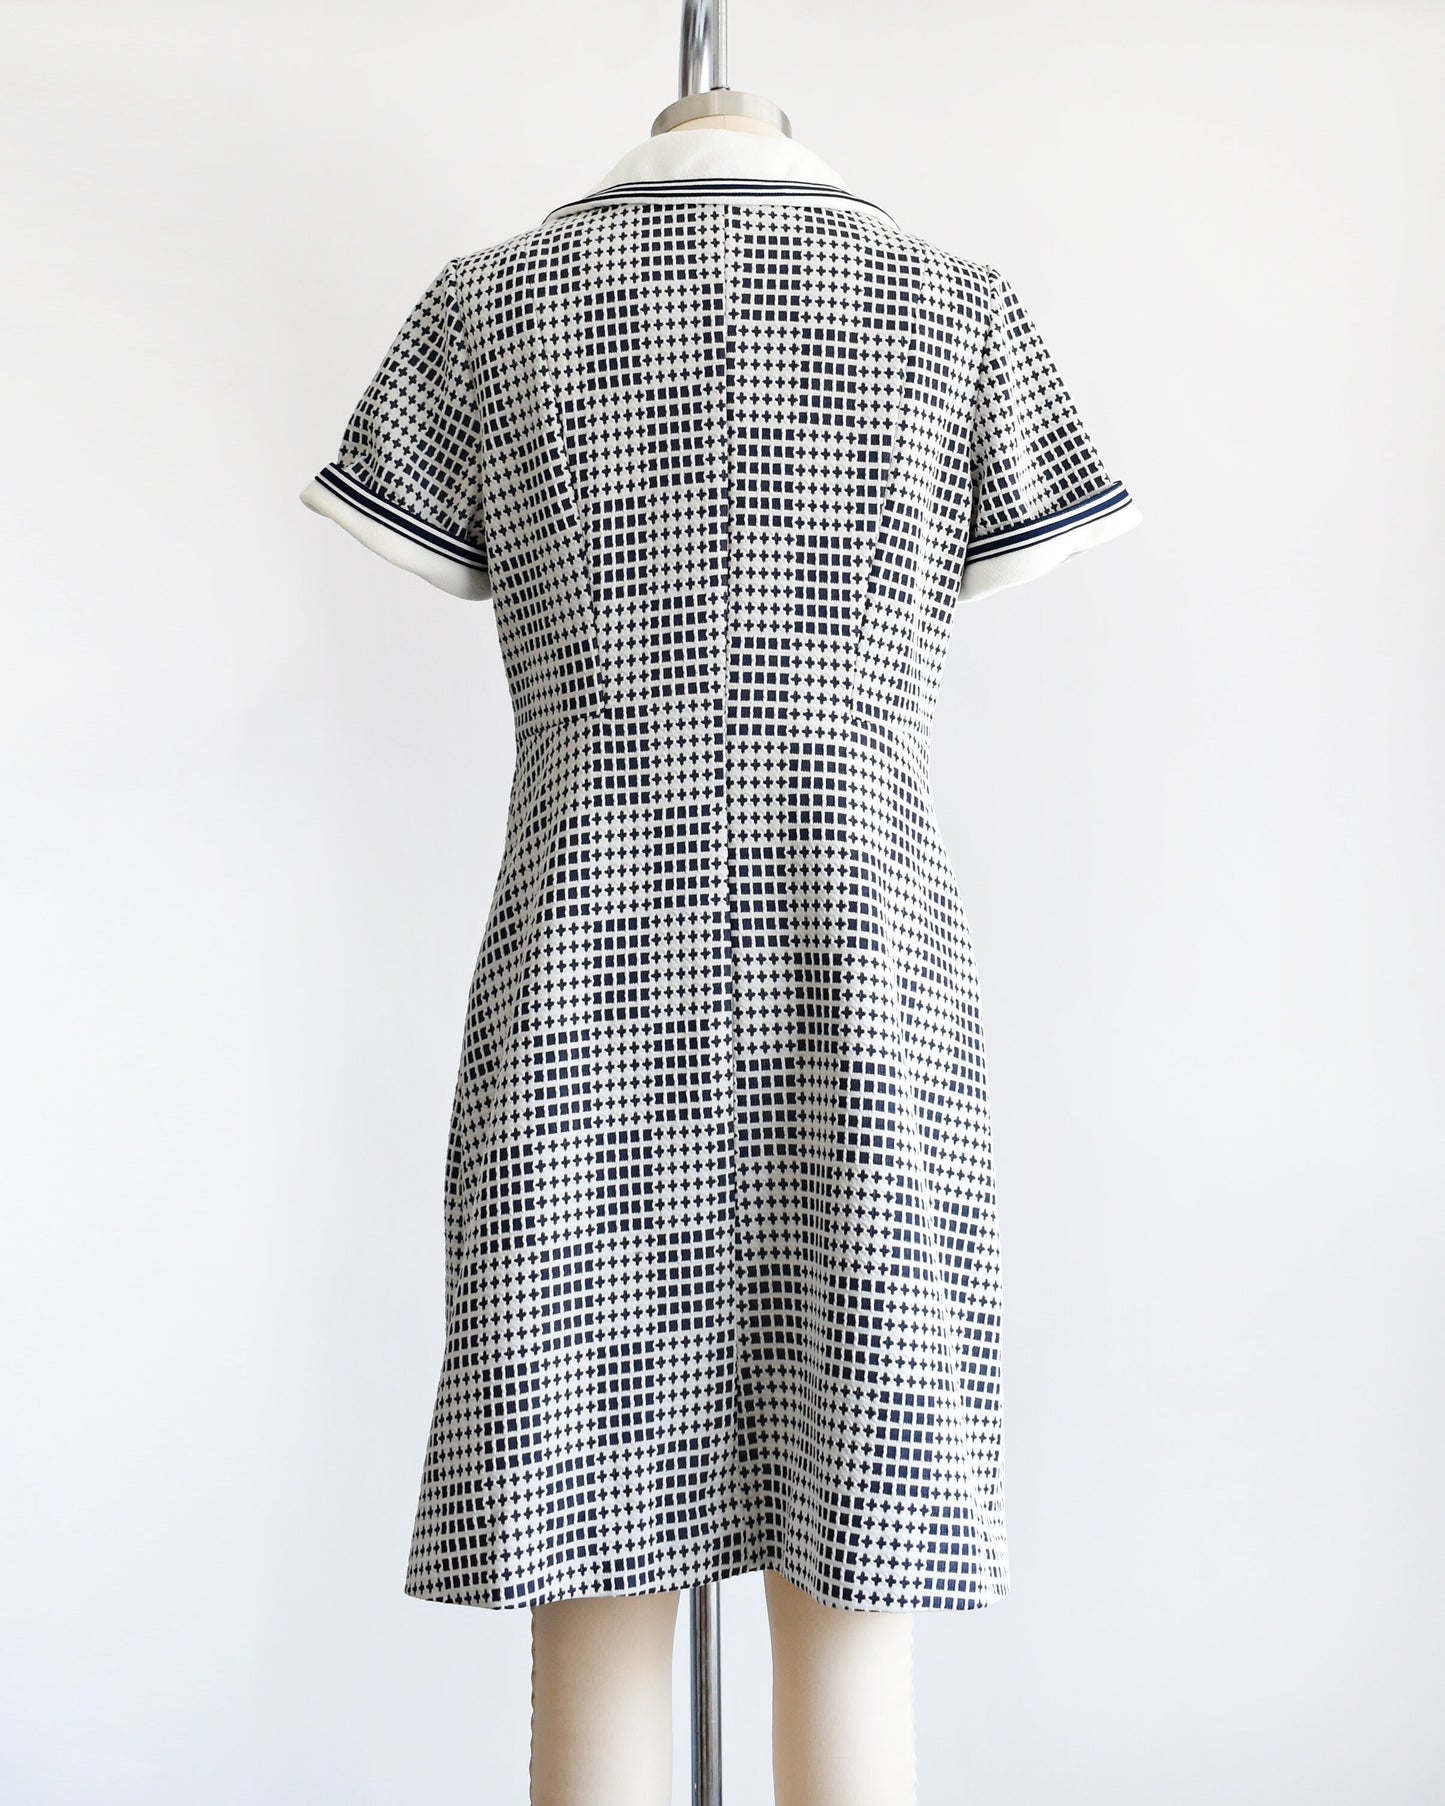 Back view of a A vintage 70s mod dress that has a blue and white geometric print, white wide collar with navy trim, and matching white and navy trim on the short sleeves. The dress is on a dress form.